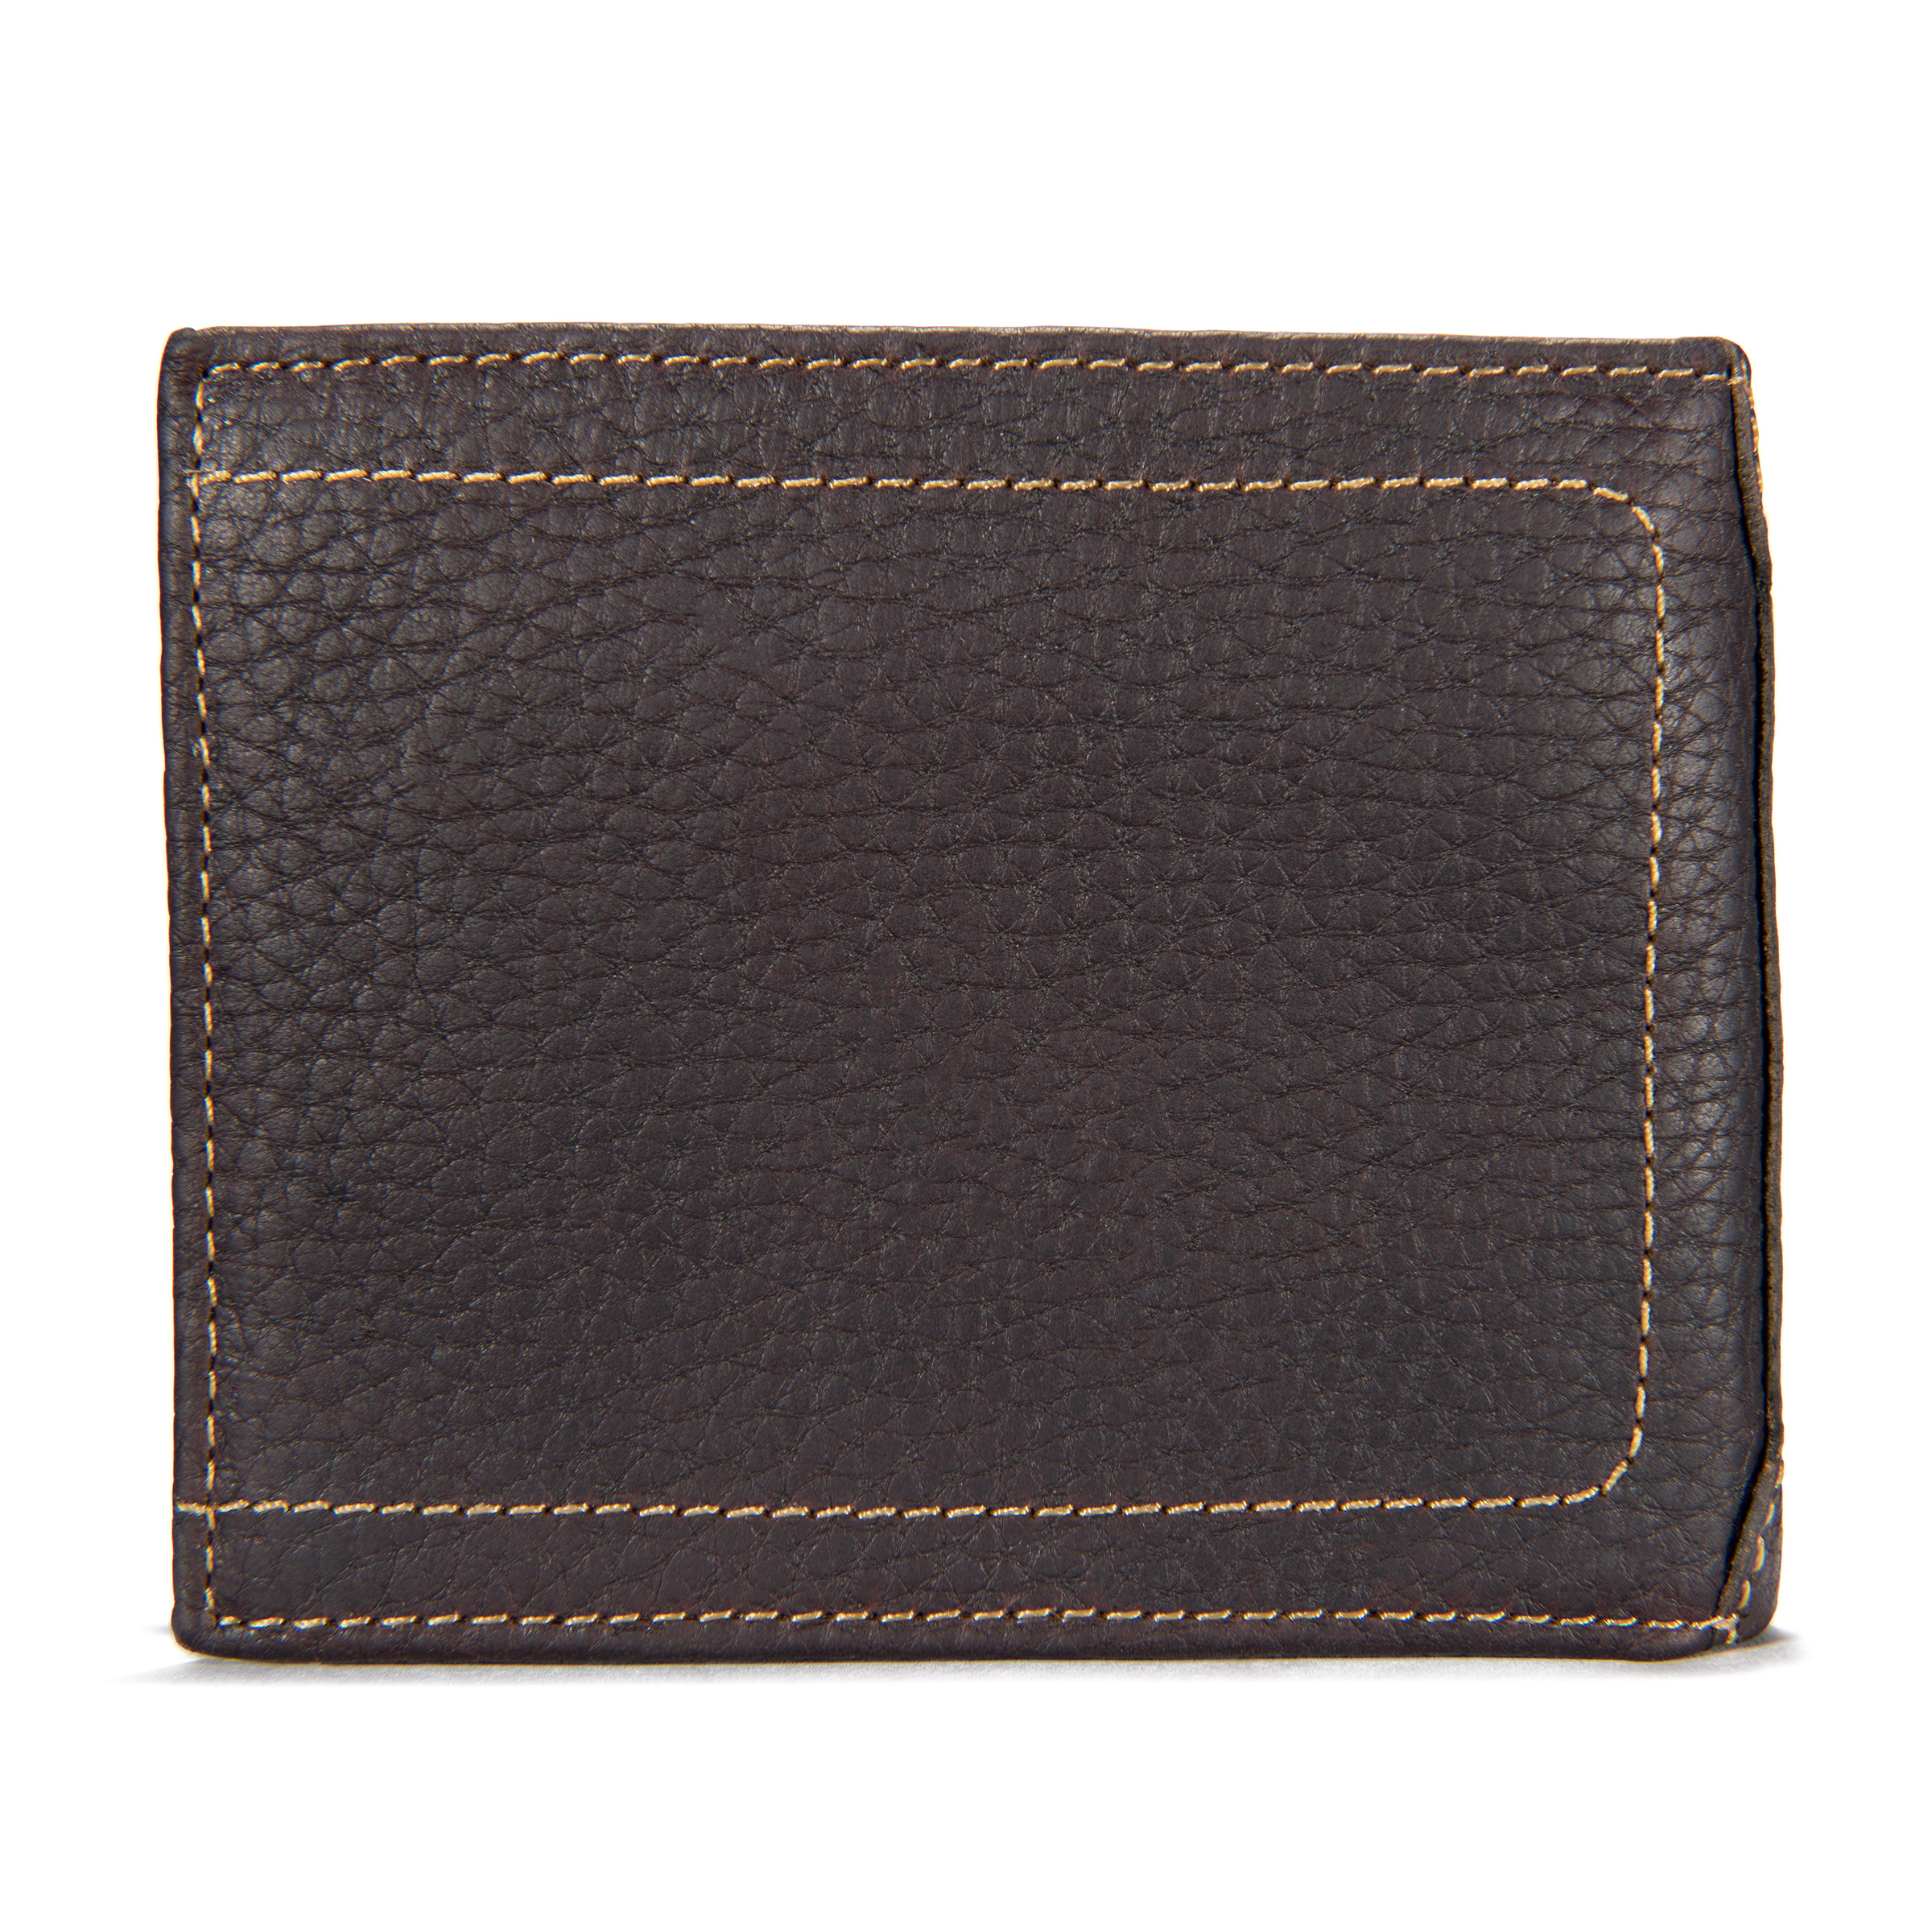 Picture of Carhartt B0000210 Mens Pebble Leather Passcase Wallet